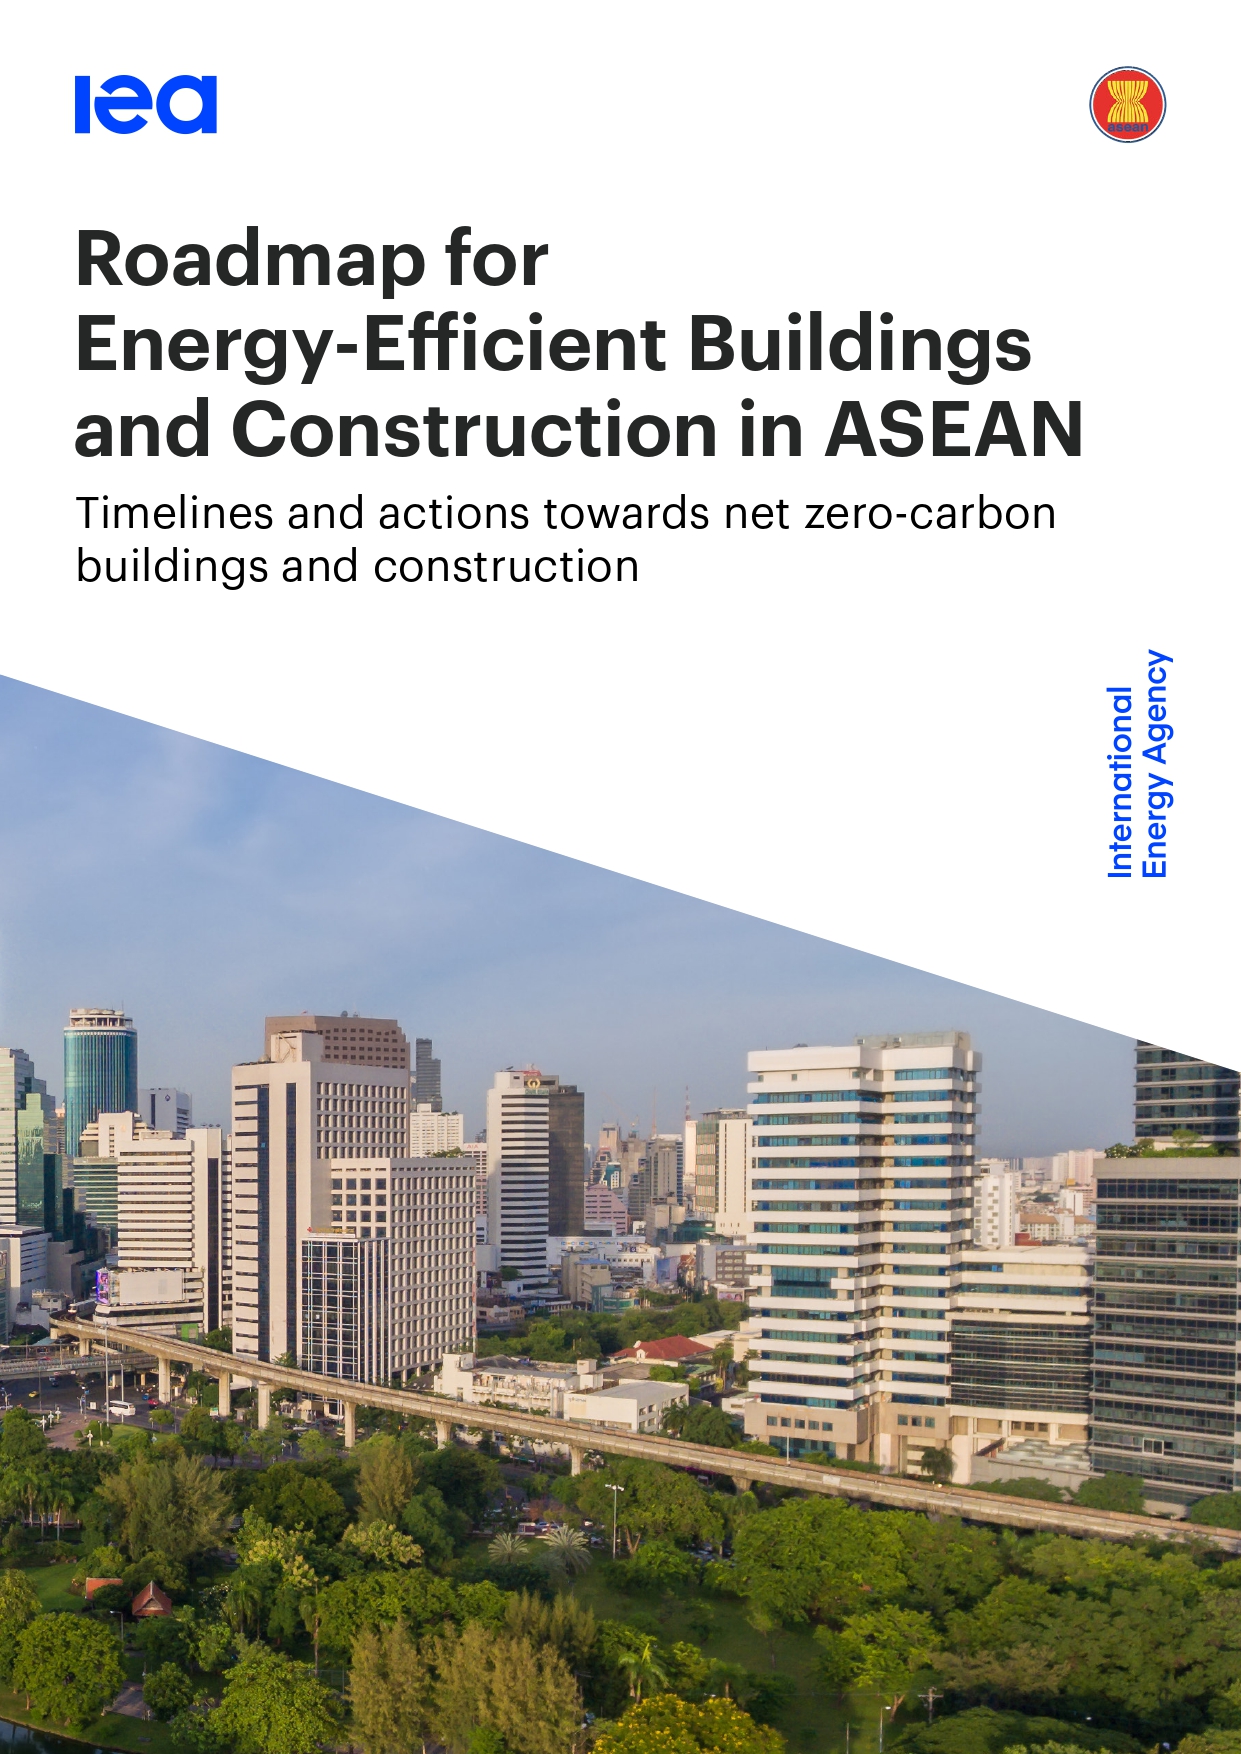 Roadmap for Energy-Efficient Buildings and Construction in ASEAN